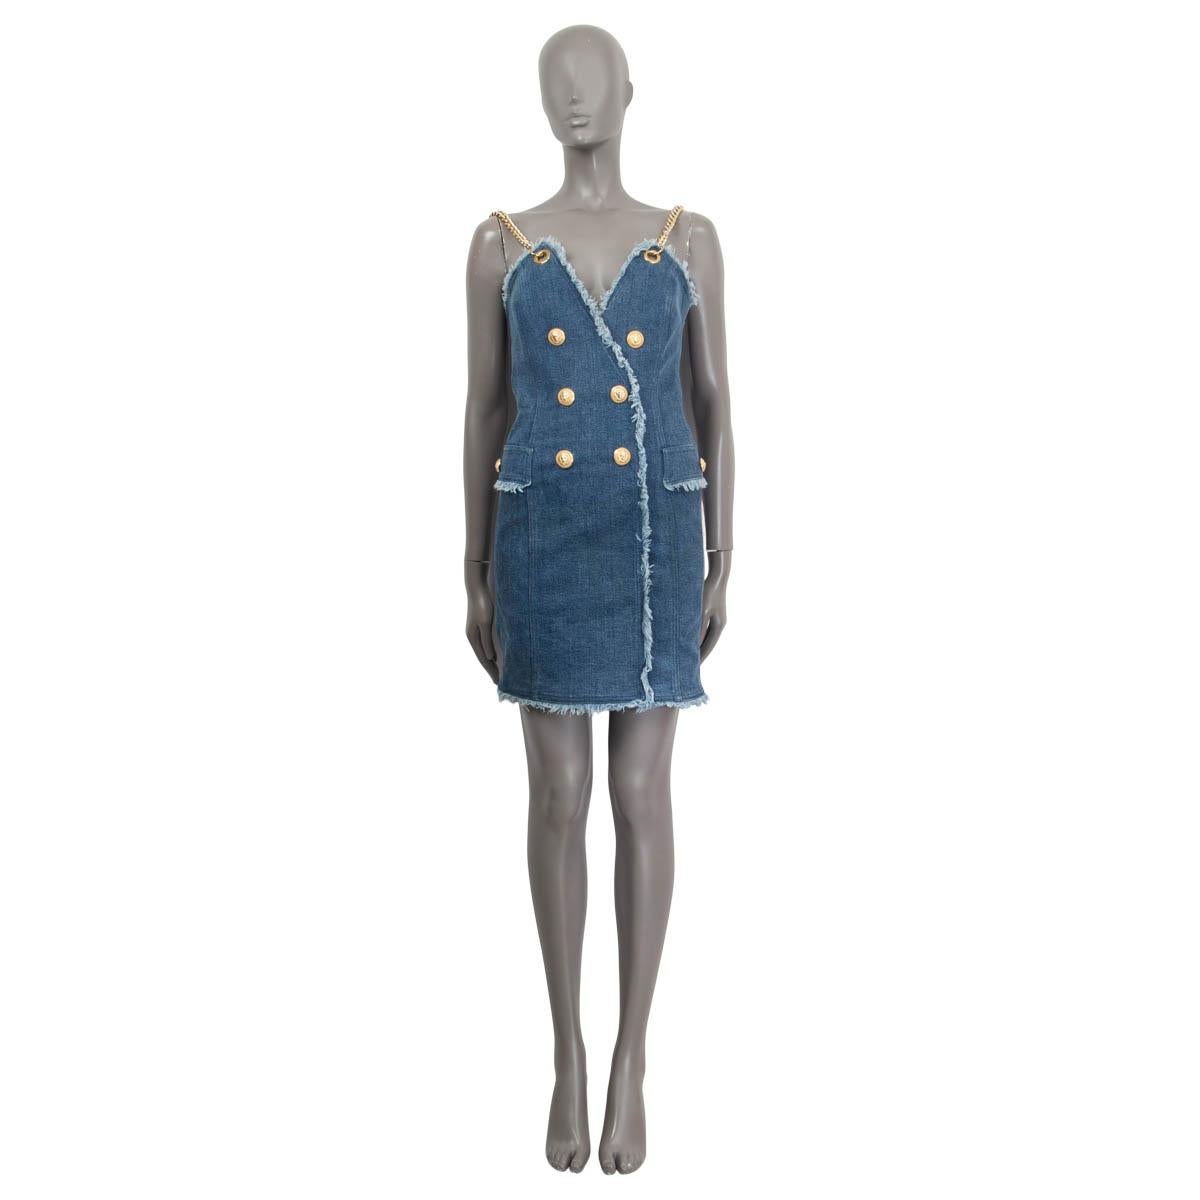 100% authentic Balmain double breasted dress in blue cotton (98%) and polyurethane (2%). Features gold chain straps, a v neck and two faux flap pockets. Opens with a golden zipper on the back. The dress shows barely visible stains on the front and